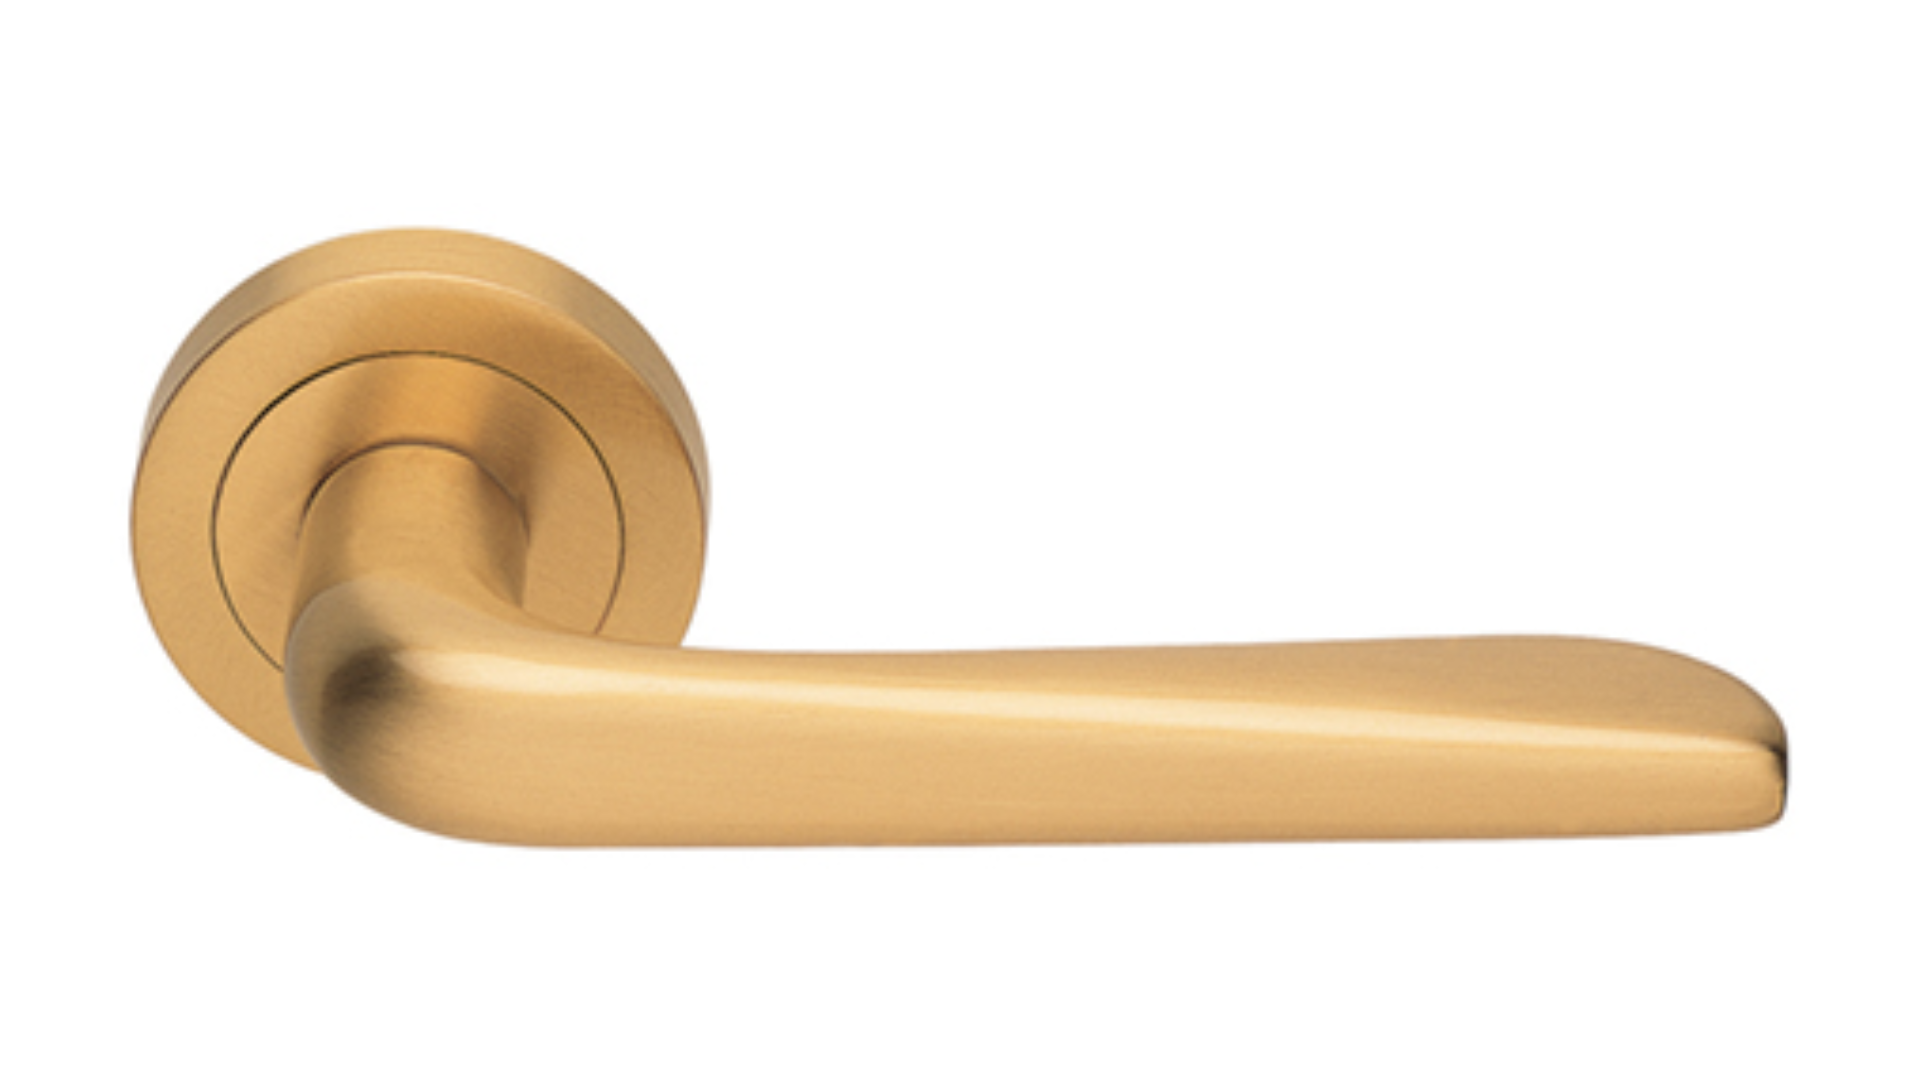 Product picture of the Petra Polished Brass Door Handle on a white background.